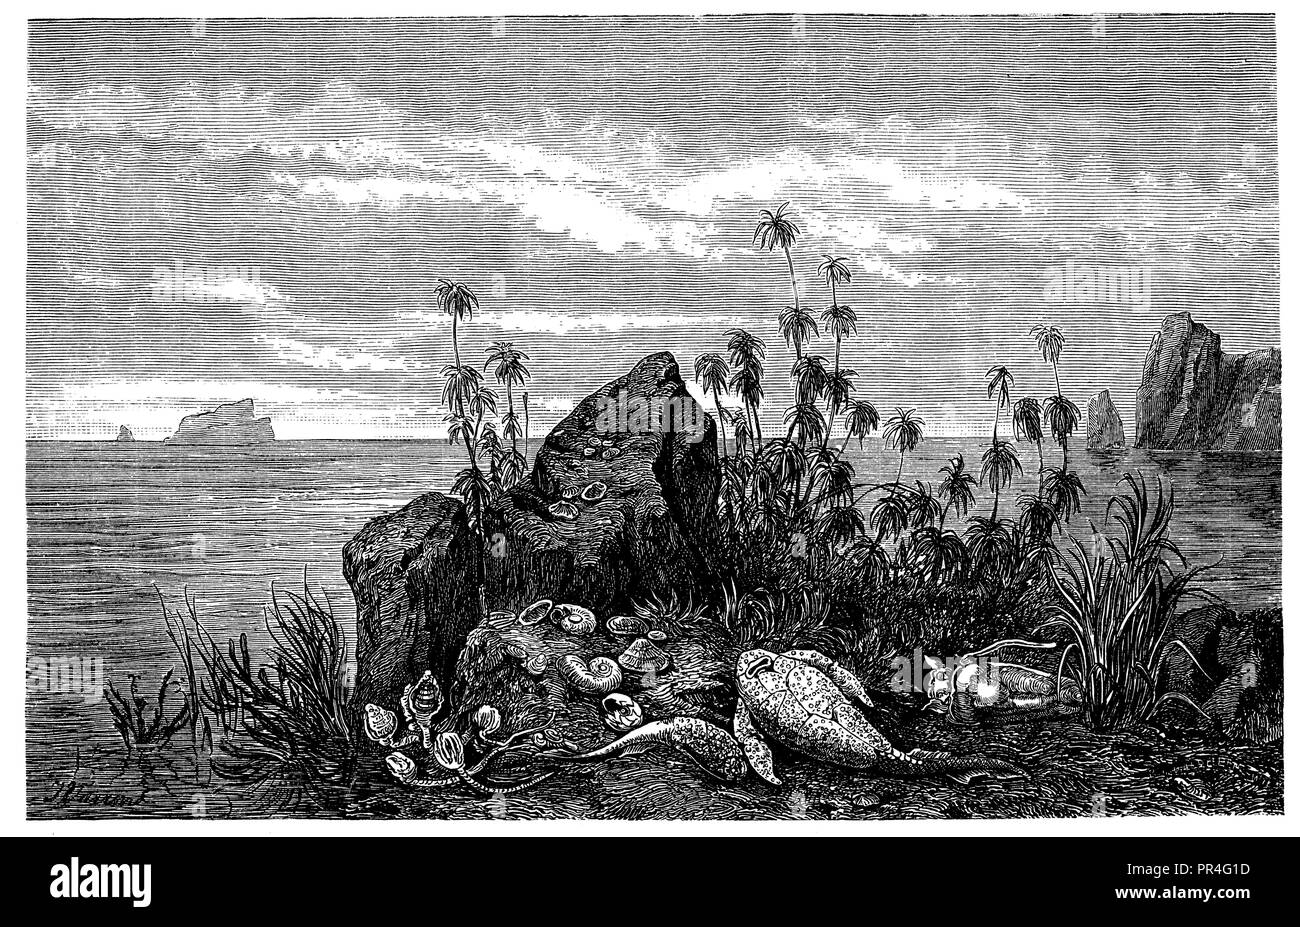 Devonian coastal landscape with sea lilies, nautiluses and armored fish, J. Varrone  1890 Stock Photo